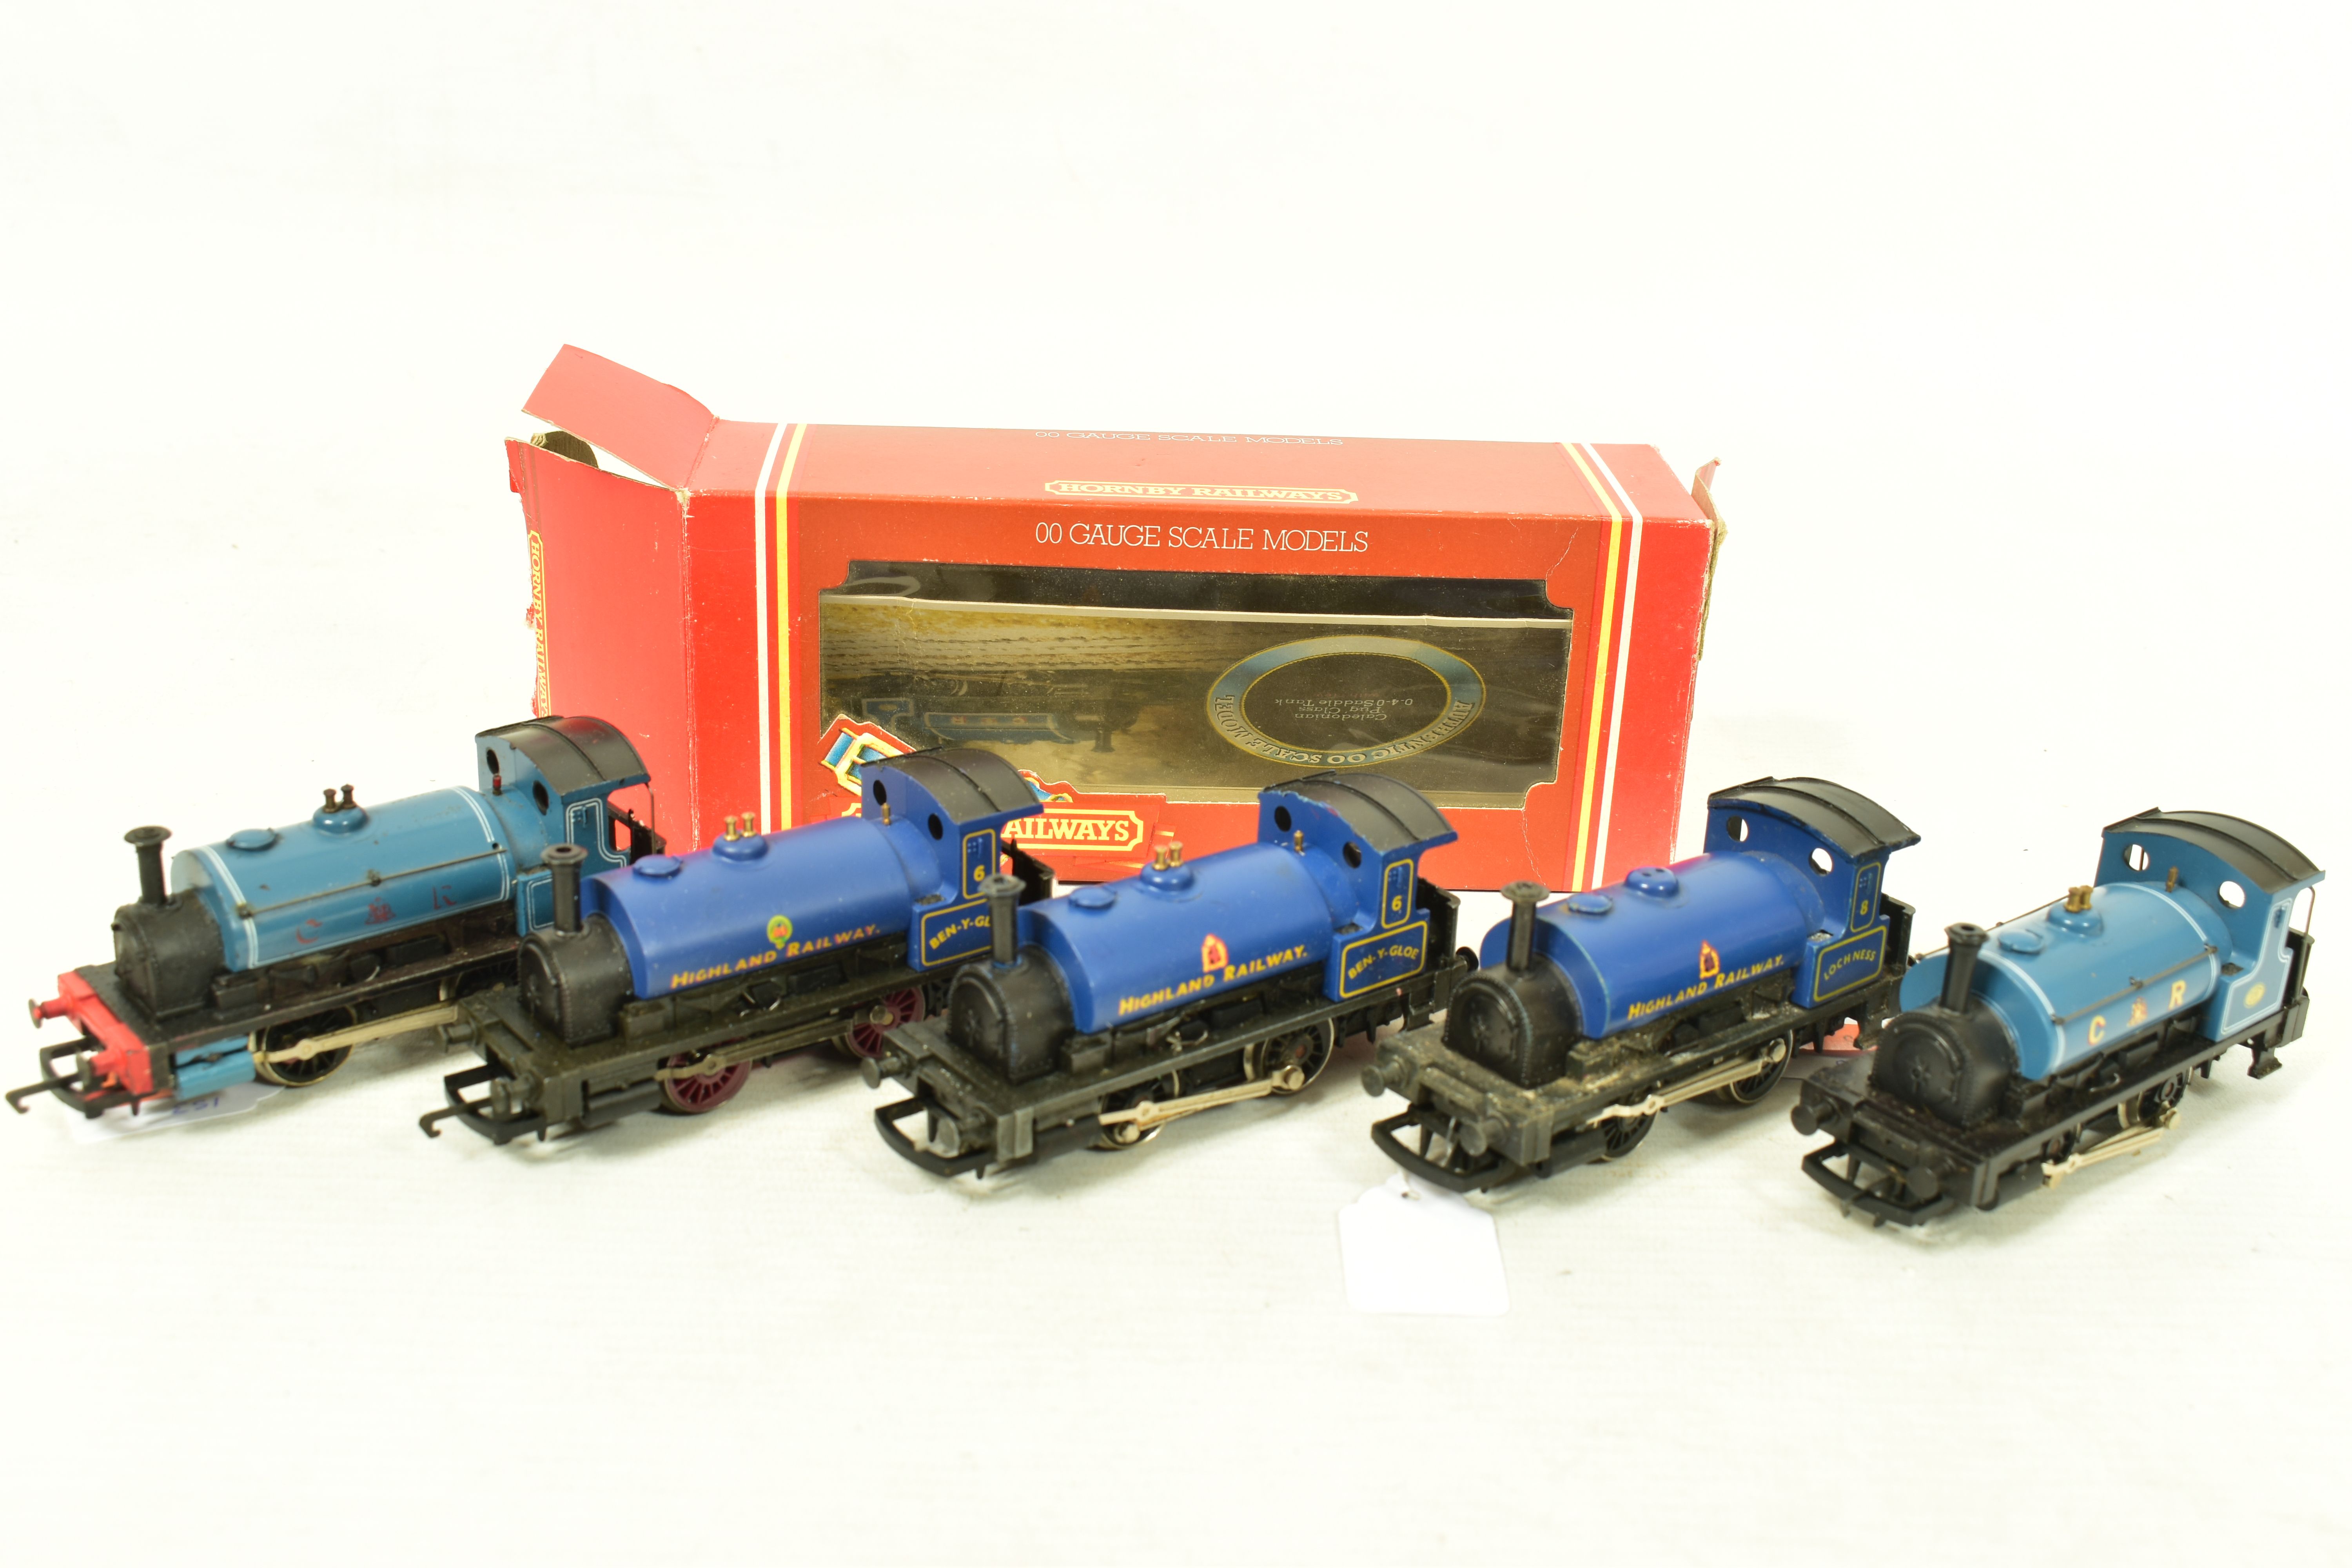 FIVE BOXED HORNBY OO GAUGE CLASS 0F PUG SADDLE TANK LOCOMOTIVES, 2 x No.270, C.R. blue livery (